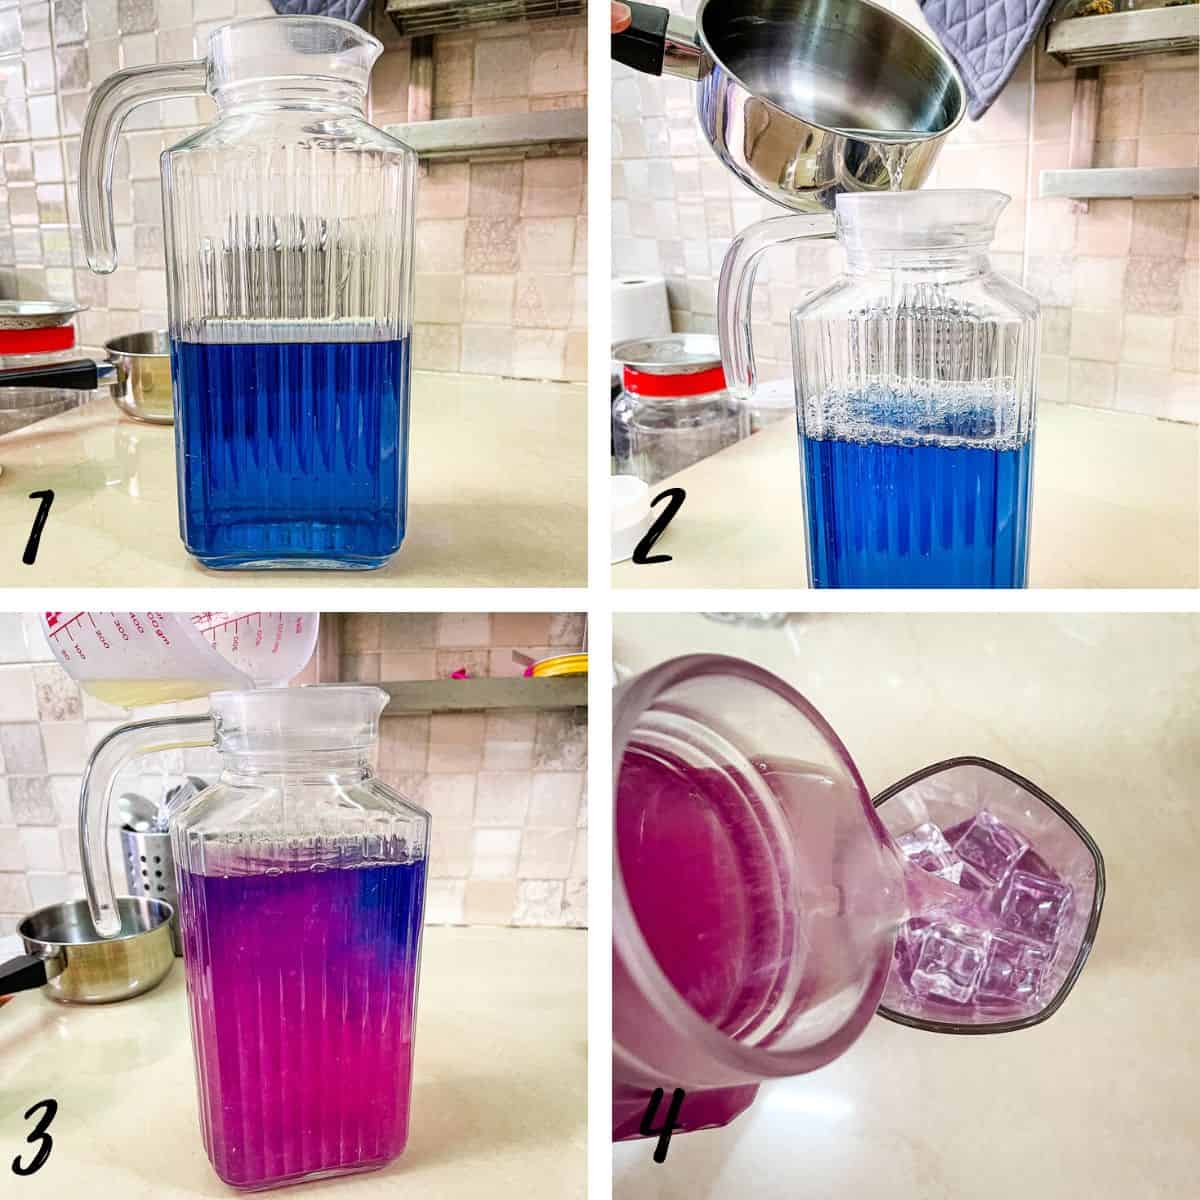 A poster of 4 images showing how to make butterfly pea flower lemonade.